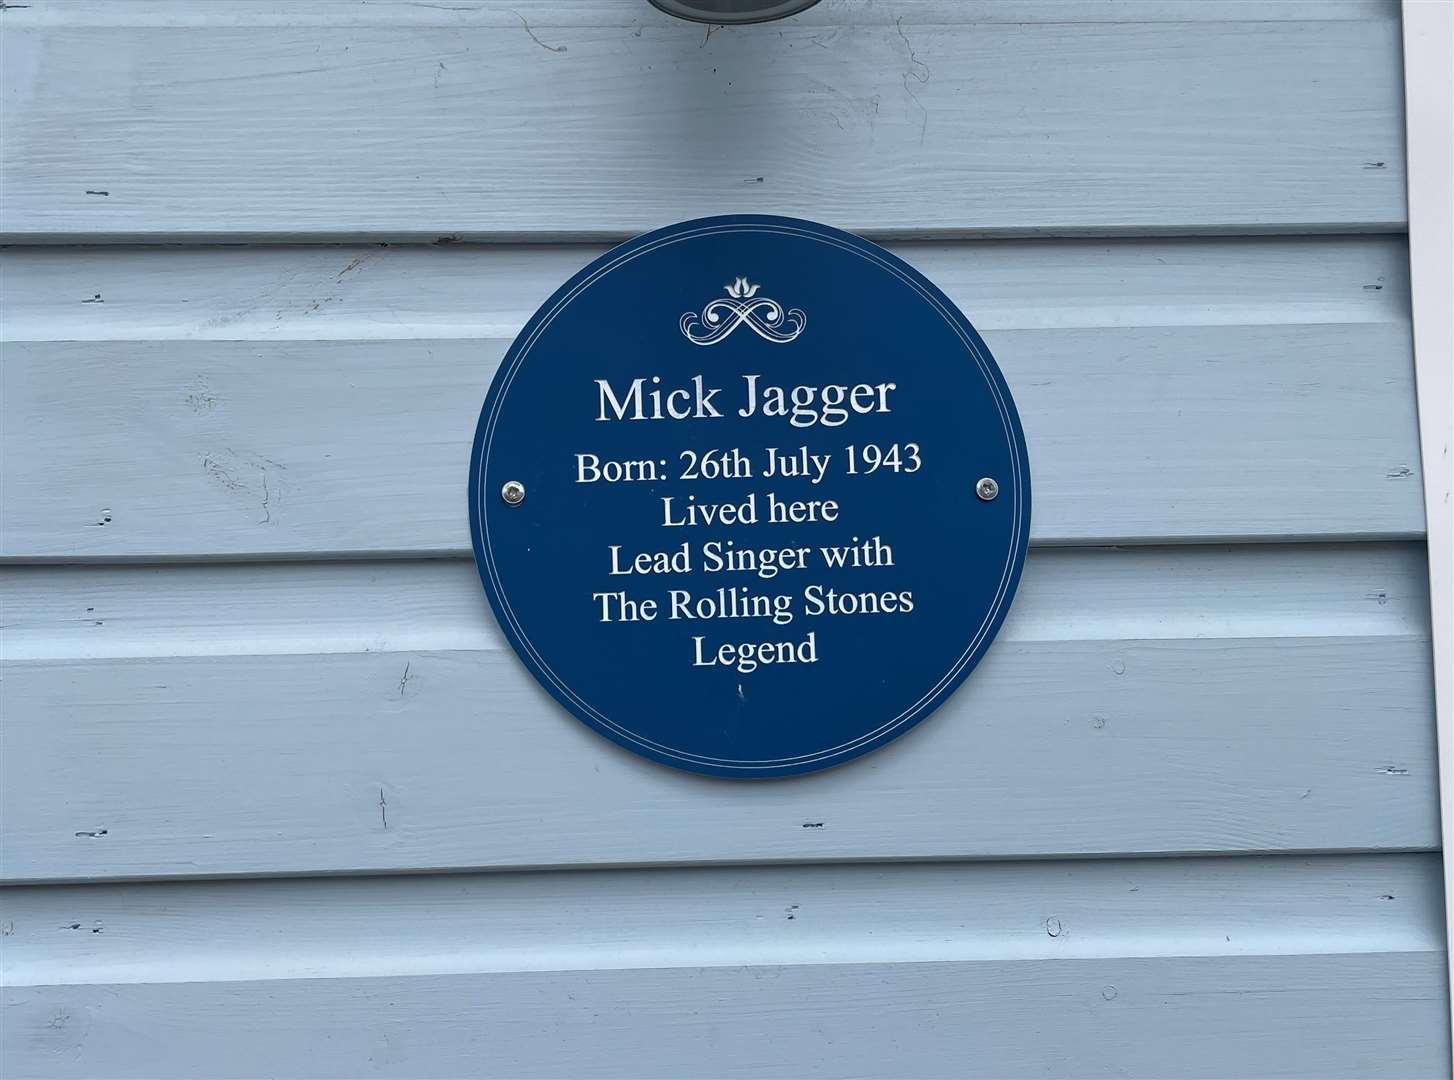 The plaque on the shed at Jagger’s former home